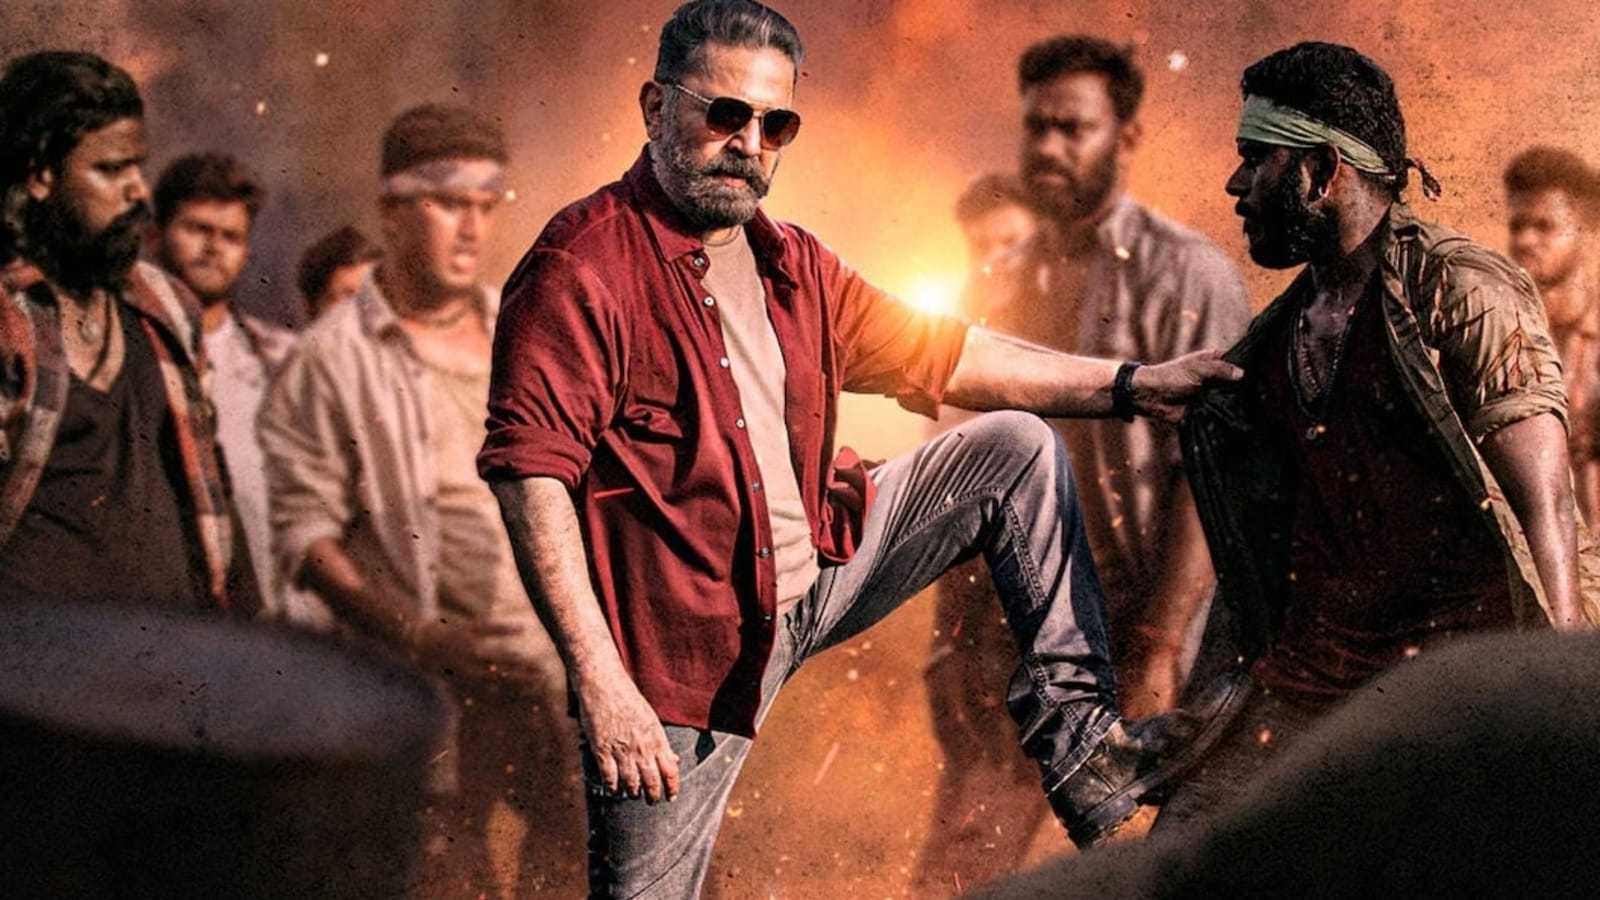 Leo: Rumors suggest Kamal Haasan will be making a cameo in the upcoming movie